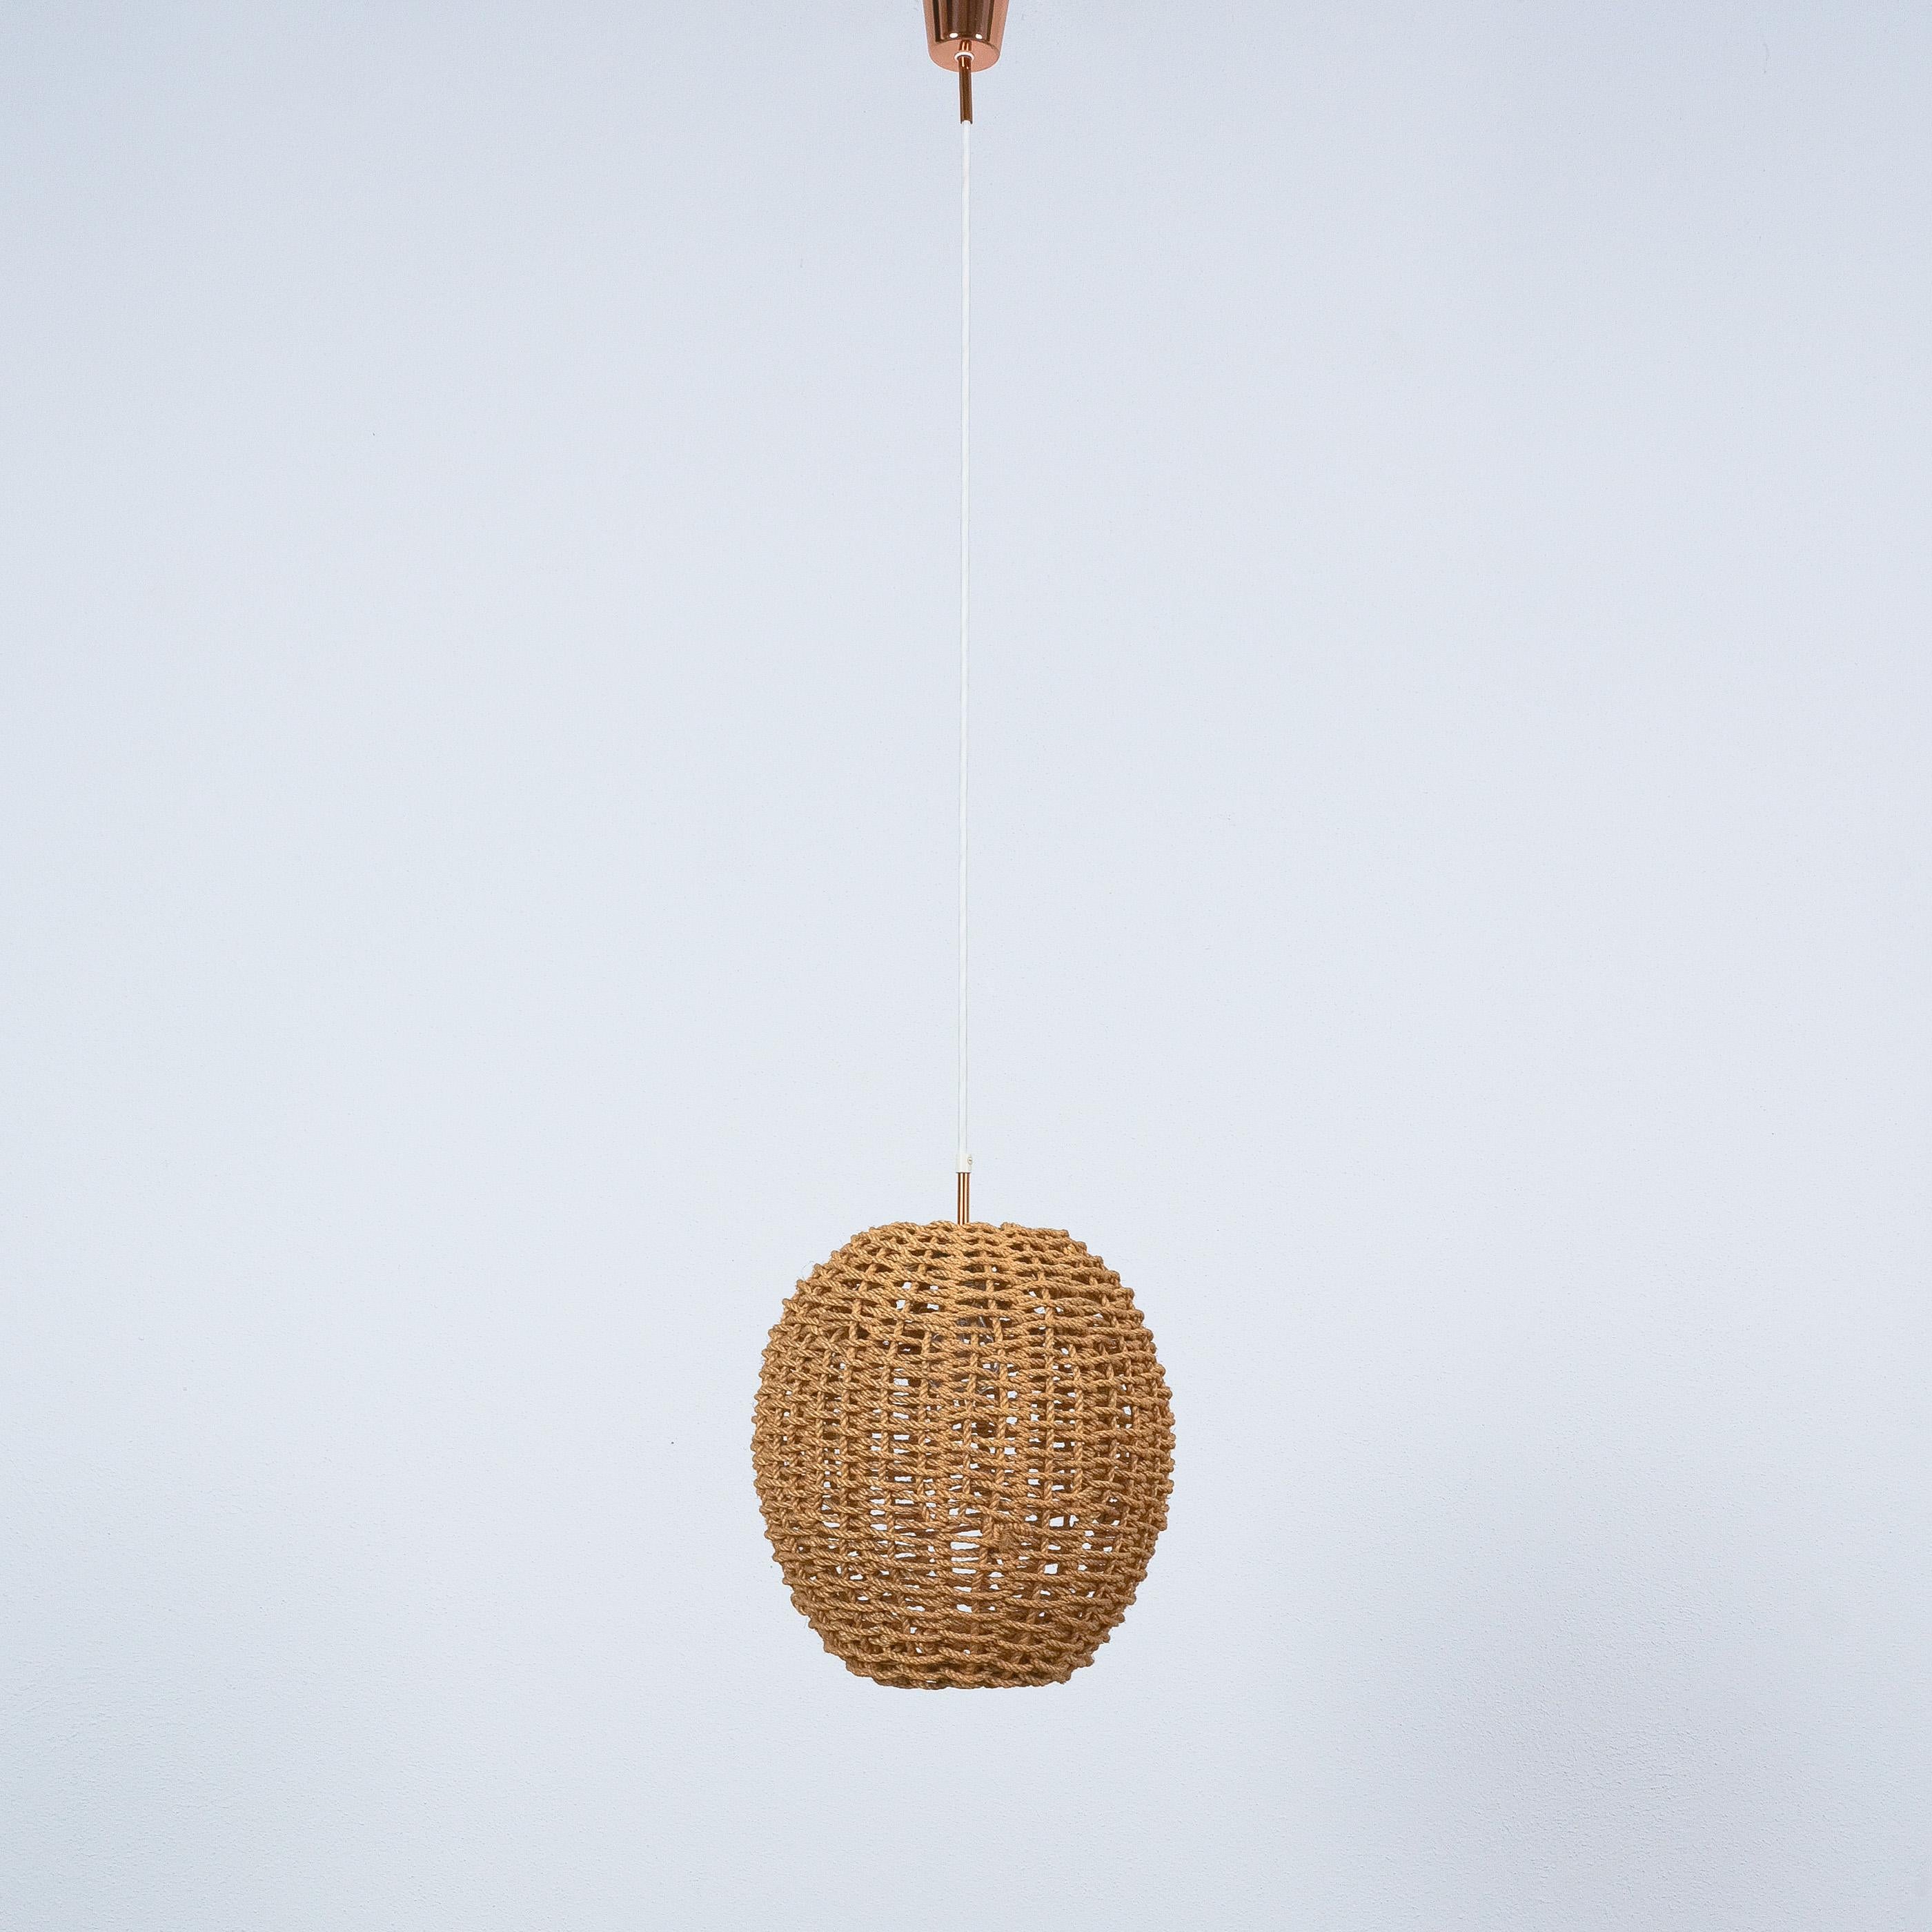 Audoux Minet Pendant Lamp Made from Rope and Brass, France, 1950 For Sale 3